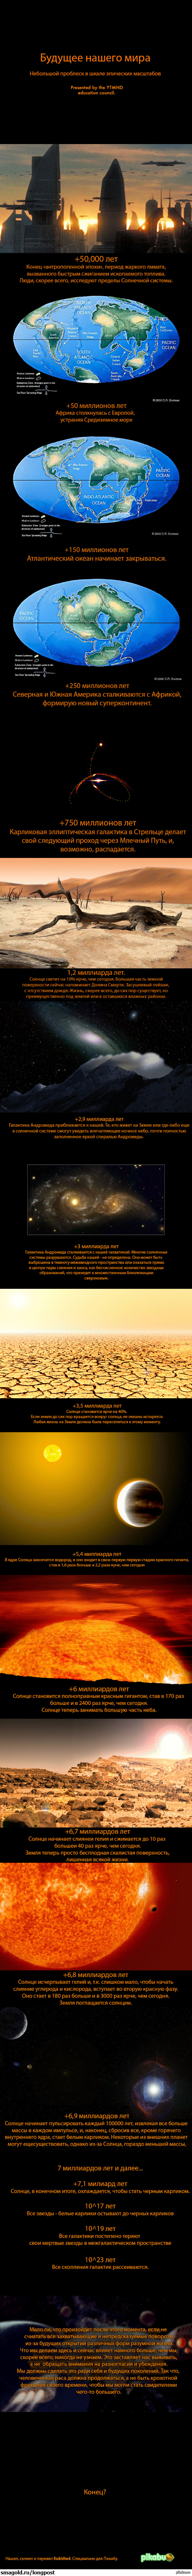 The future of our world - Future, Land, Planet Earth, Planet, Stars, Galaxy, Universe, Andromeda, Longpost, Stars